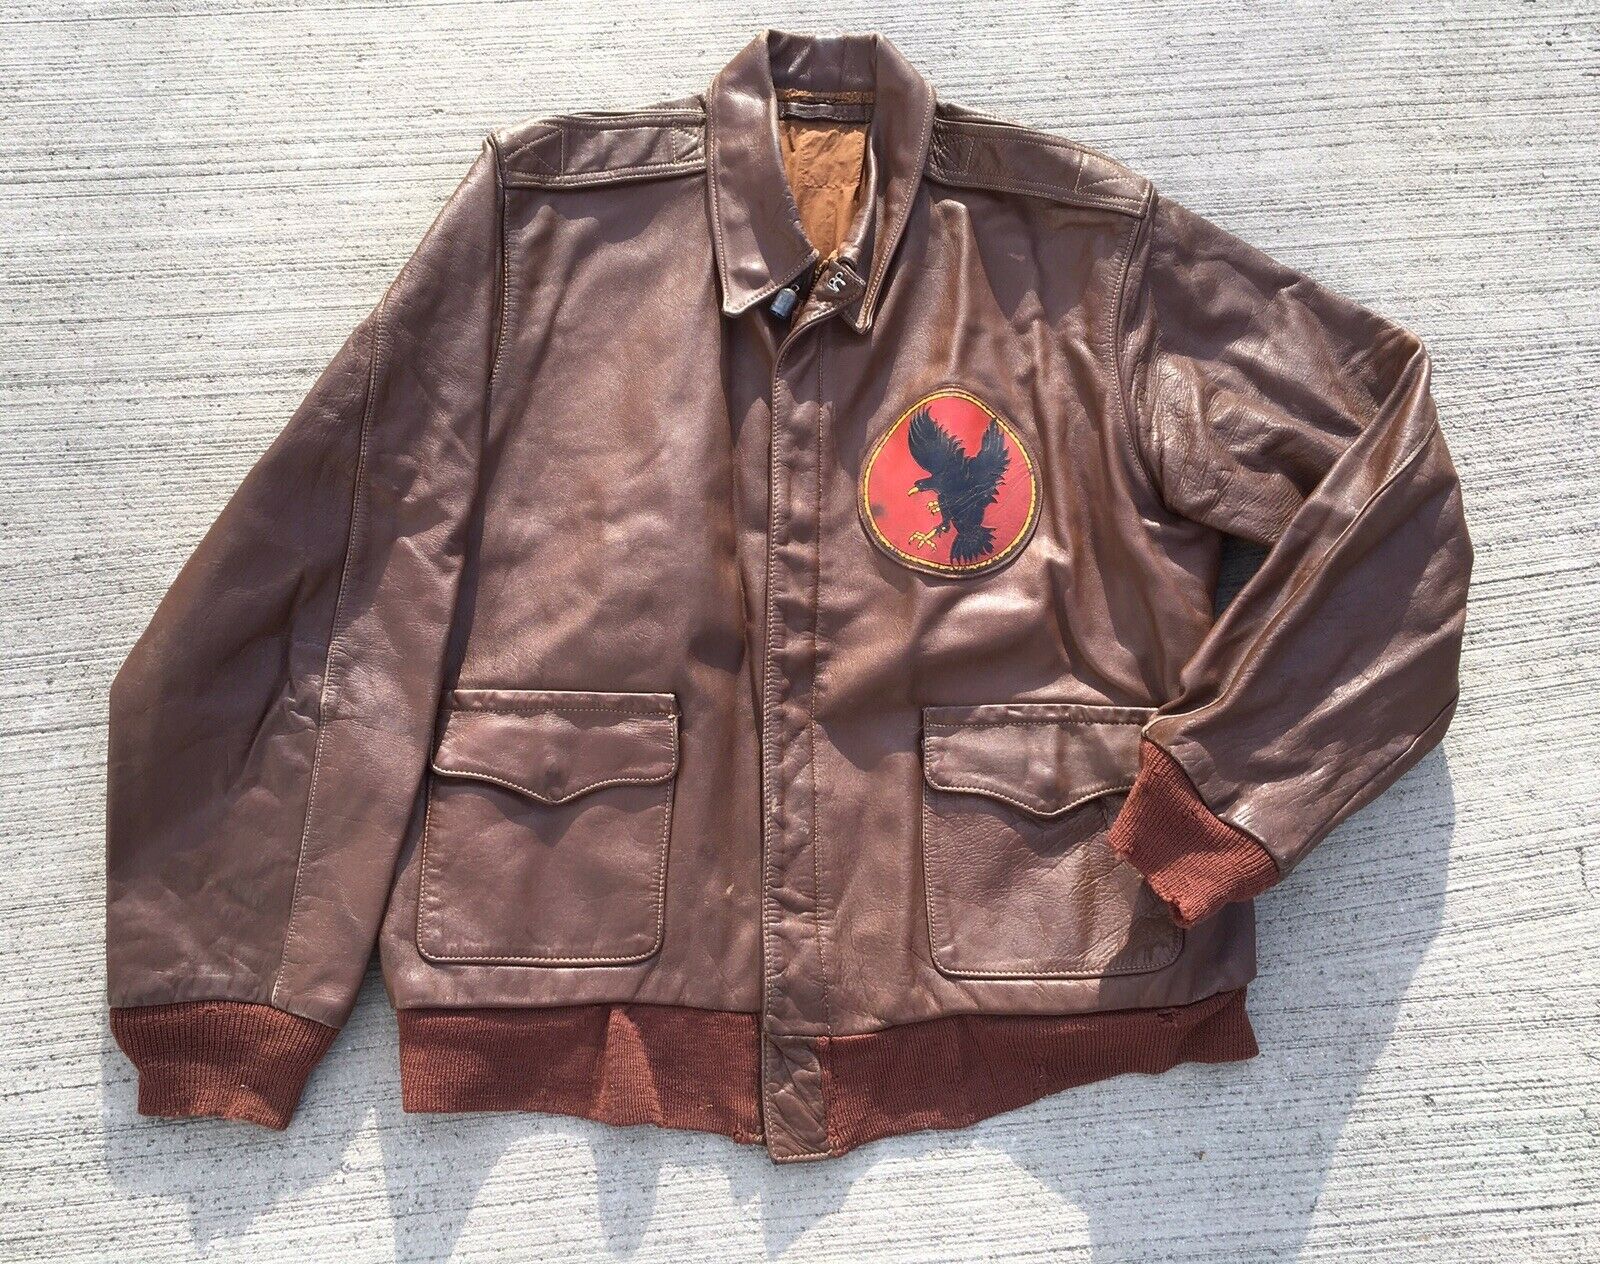 Ja Dubow 27798 (Platon) A-2 jacket review and pics | Page 23 | Vintage ...